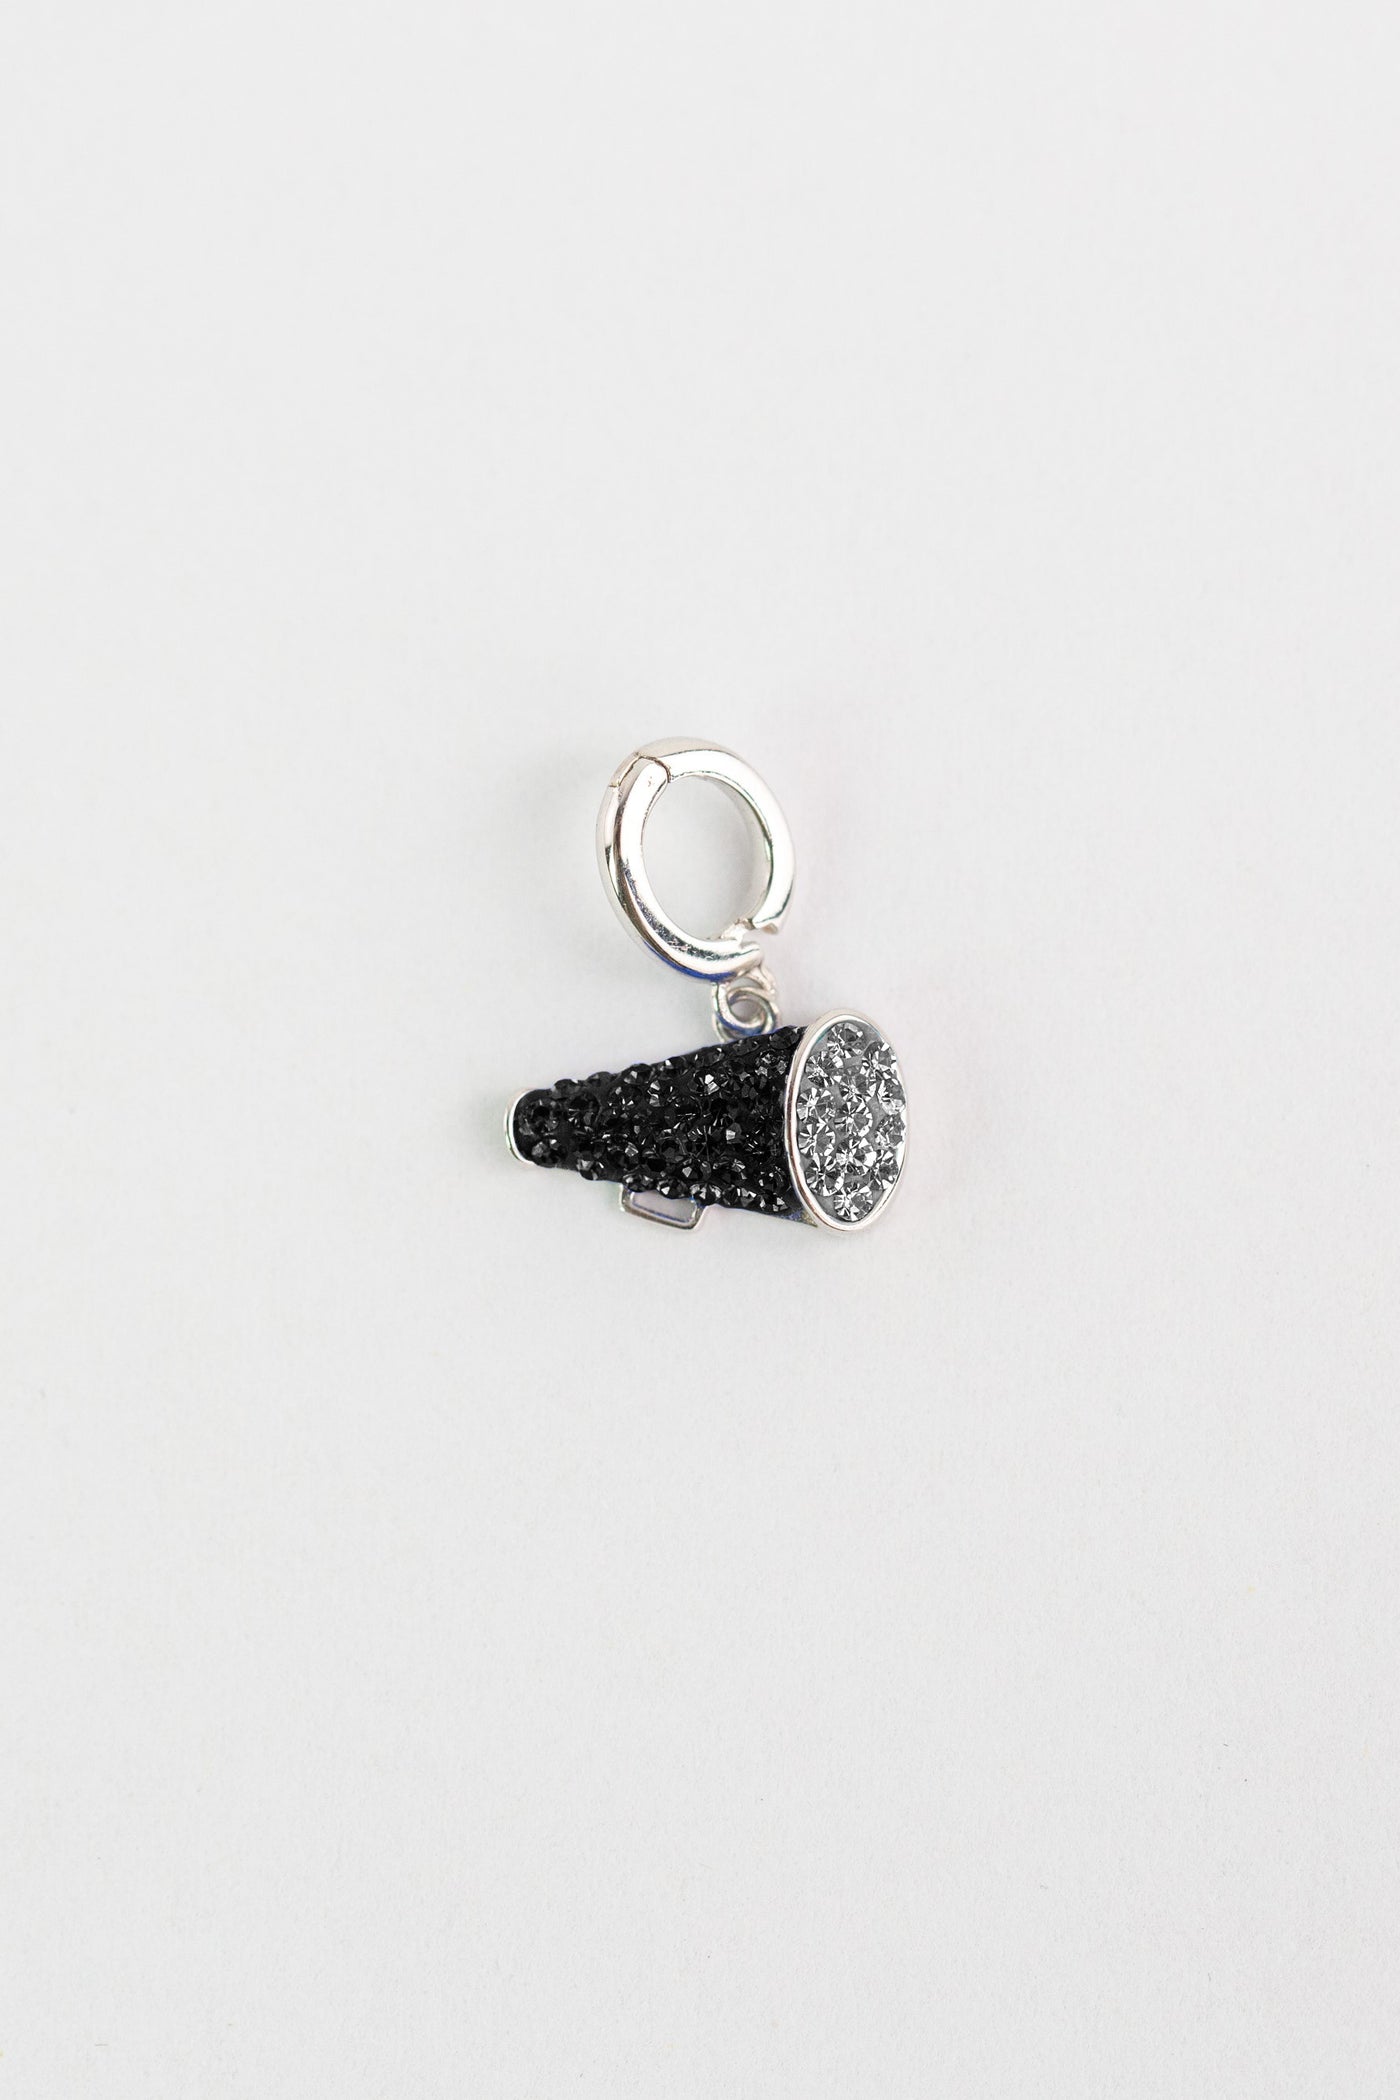 Cheer Megaphone Crystal Sterling Silver Charm in jet black + black diamond crystals  | Annie and Sisters